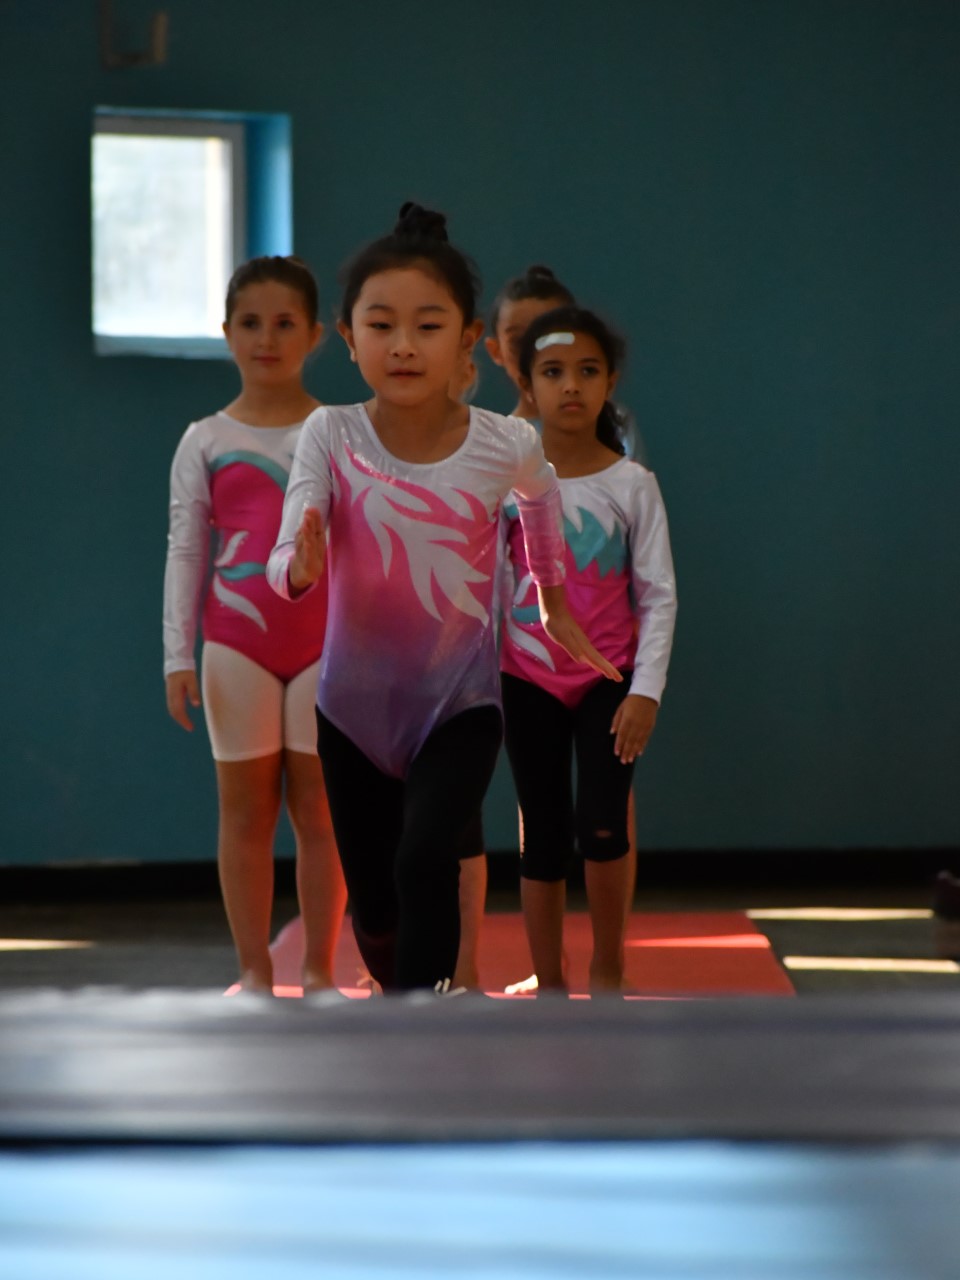 Image for Activities. Small girls preparing to perform gymnastic acts.